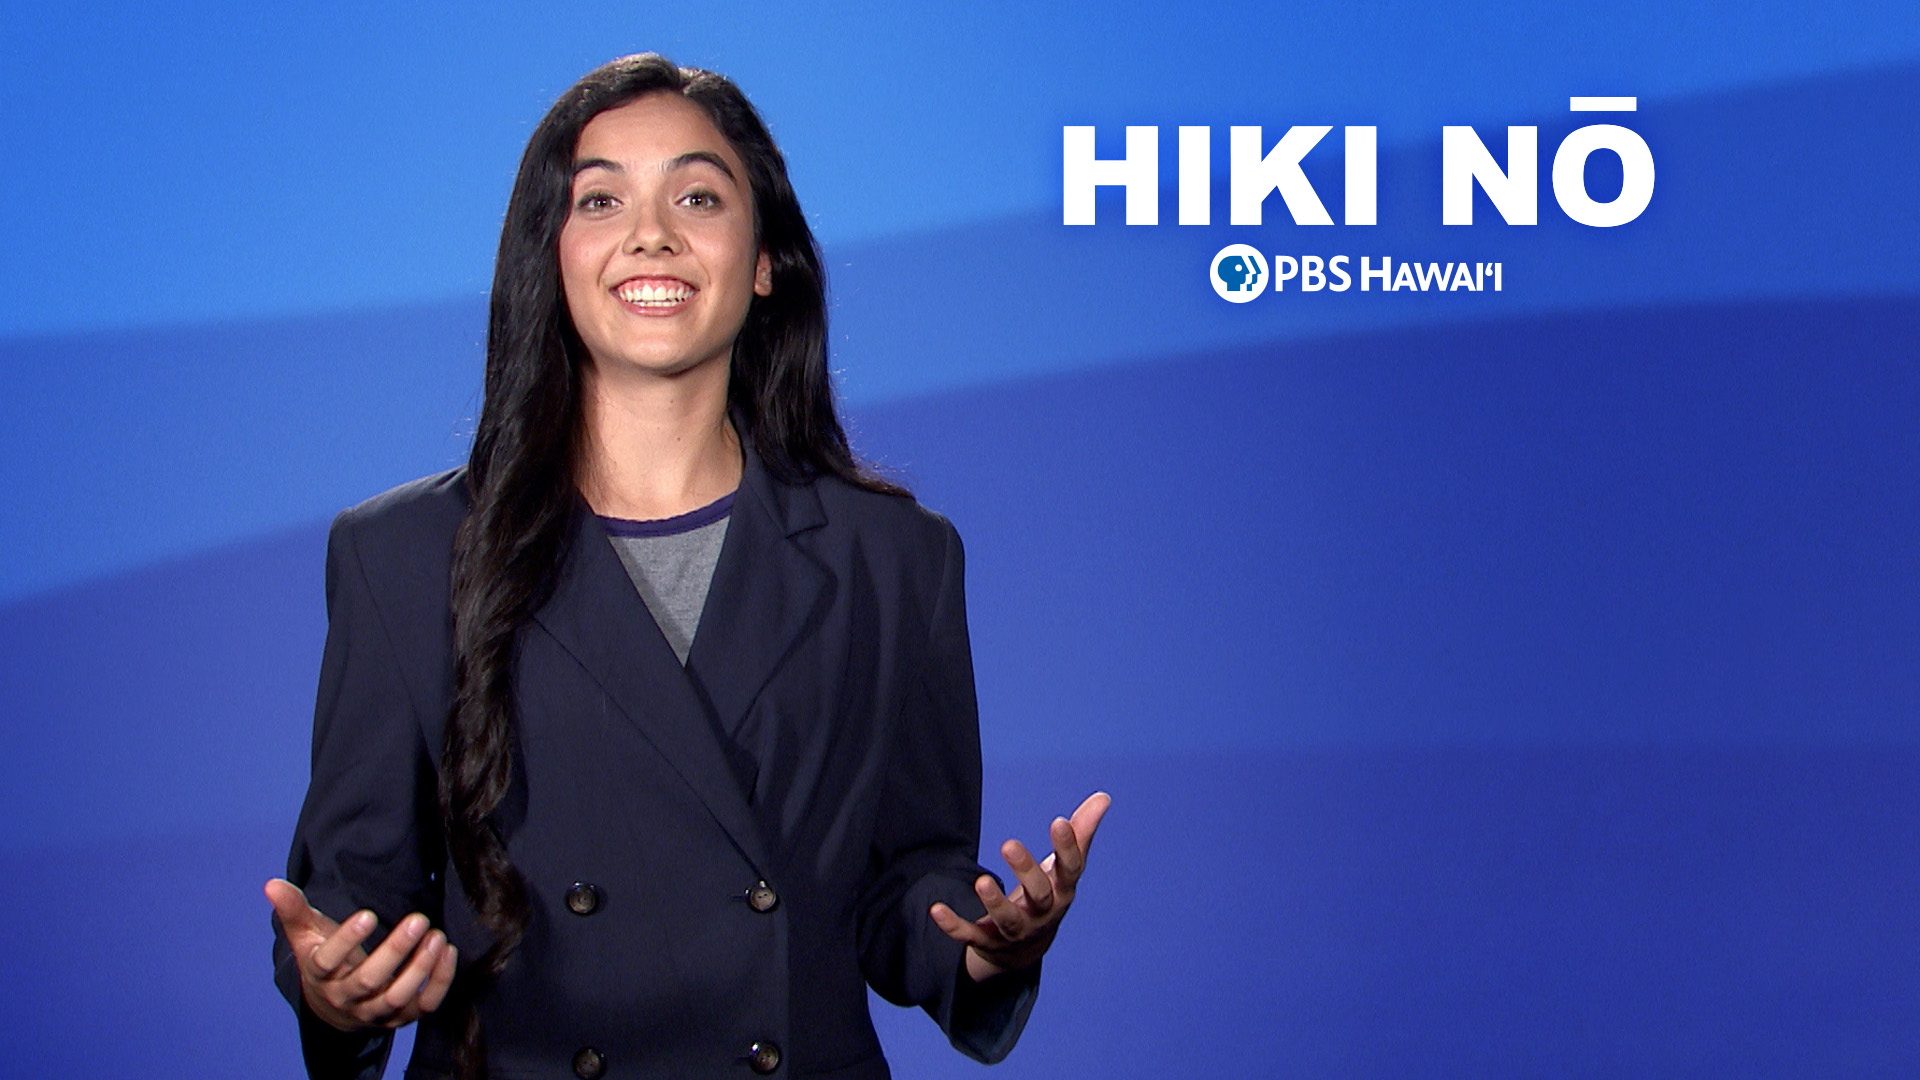 HIKI NŌ ON PBS HAWAIʻI <br/>Finding a Safe Space